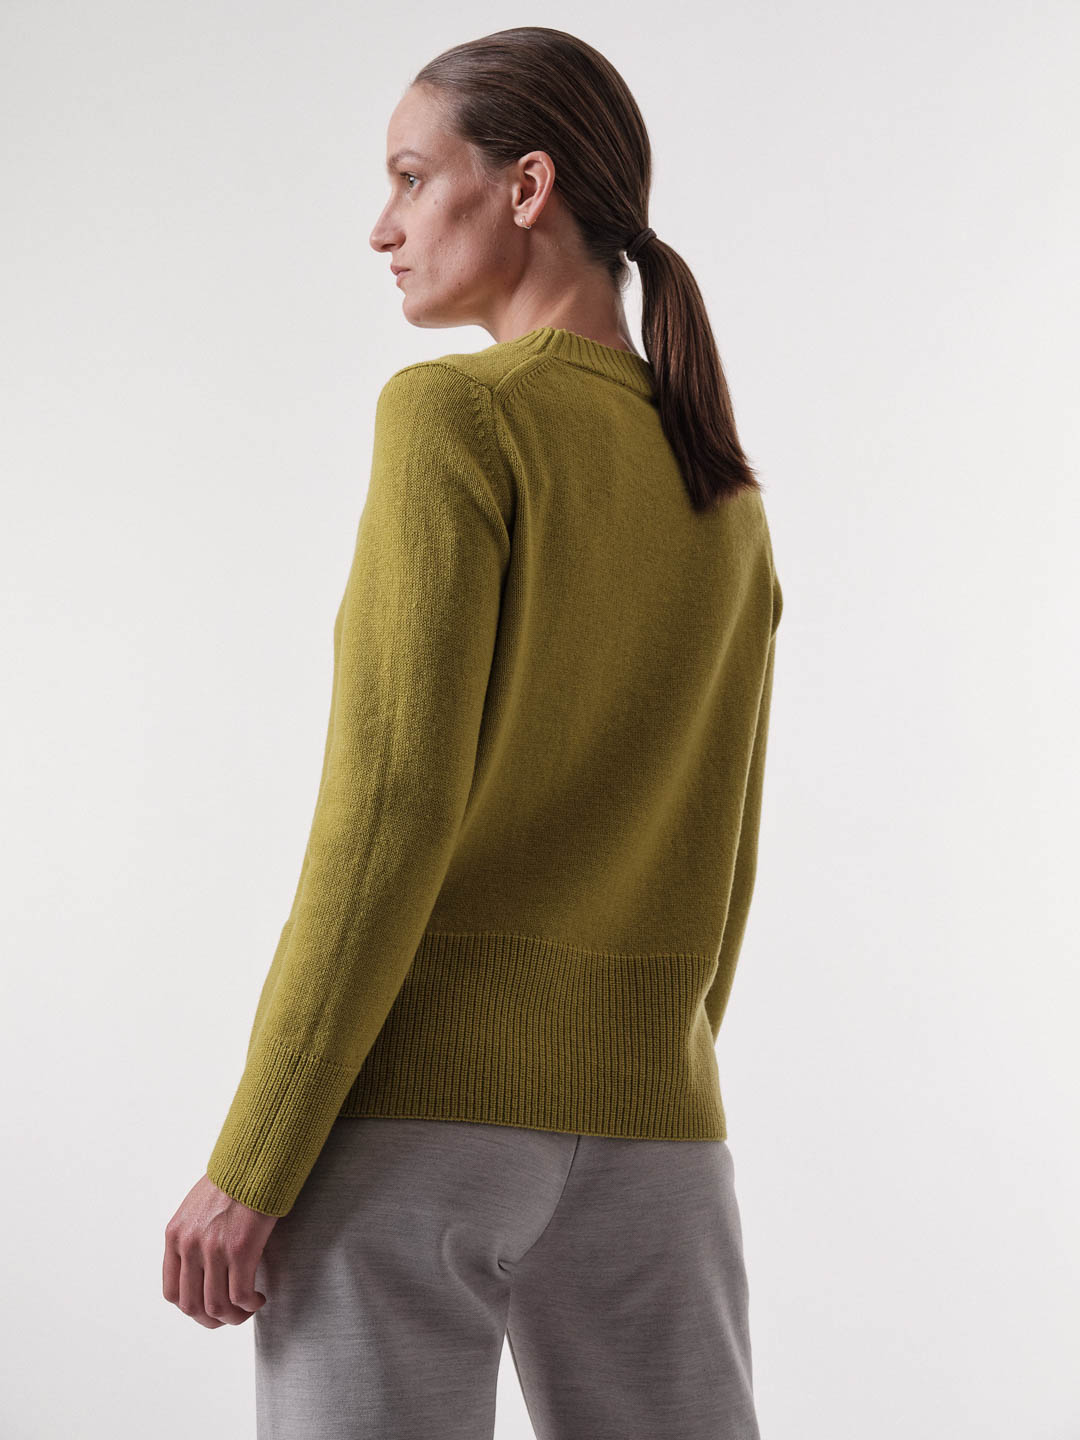 Pullover golden olive (100% Wolle)